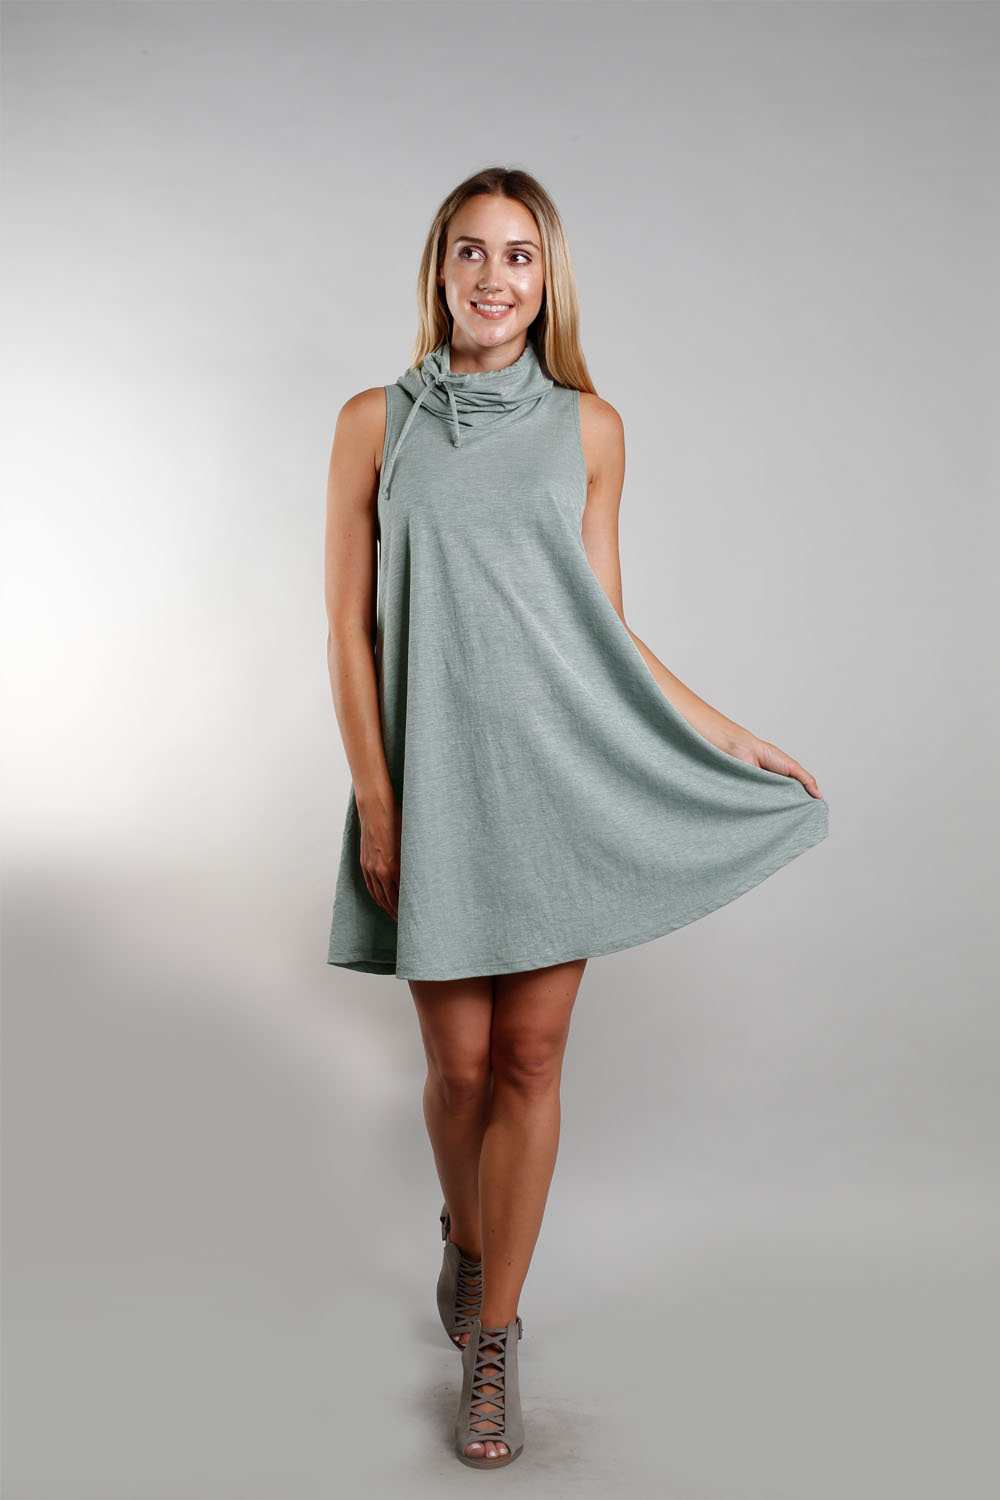 COIN 1804 Dusty Green Chambray Jersey Funnel Neck Pocket Dress